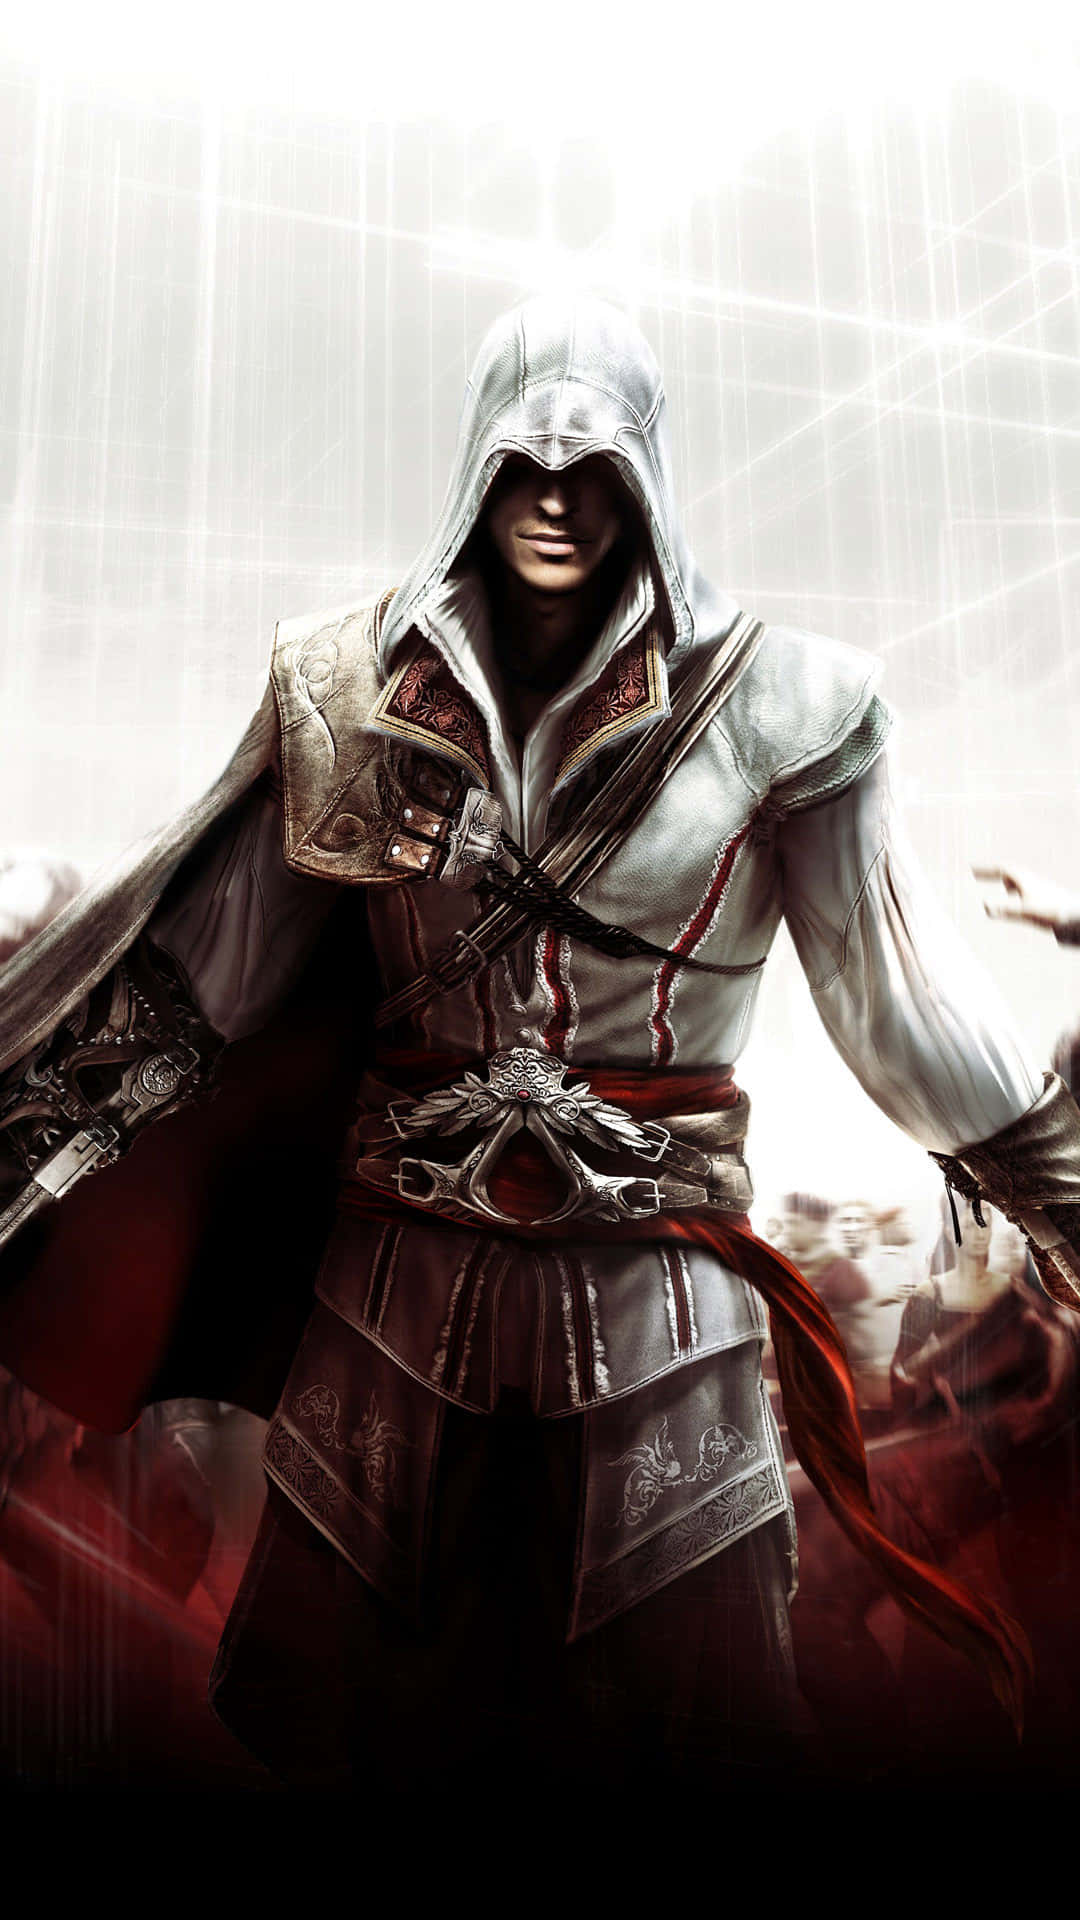 Assassin's Creed: The Resurrection Plot takes us all over the world